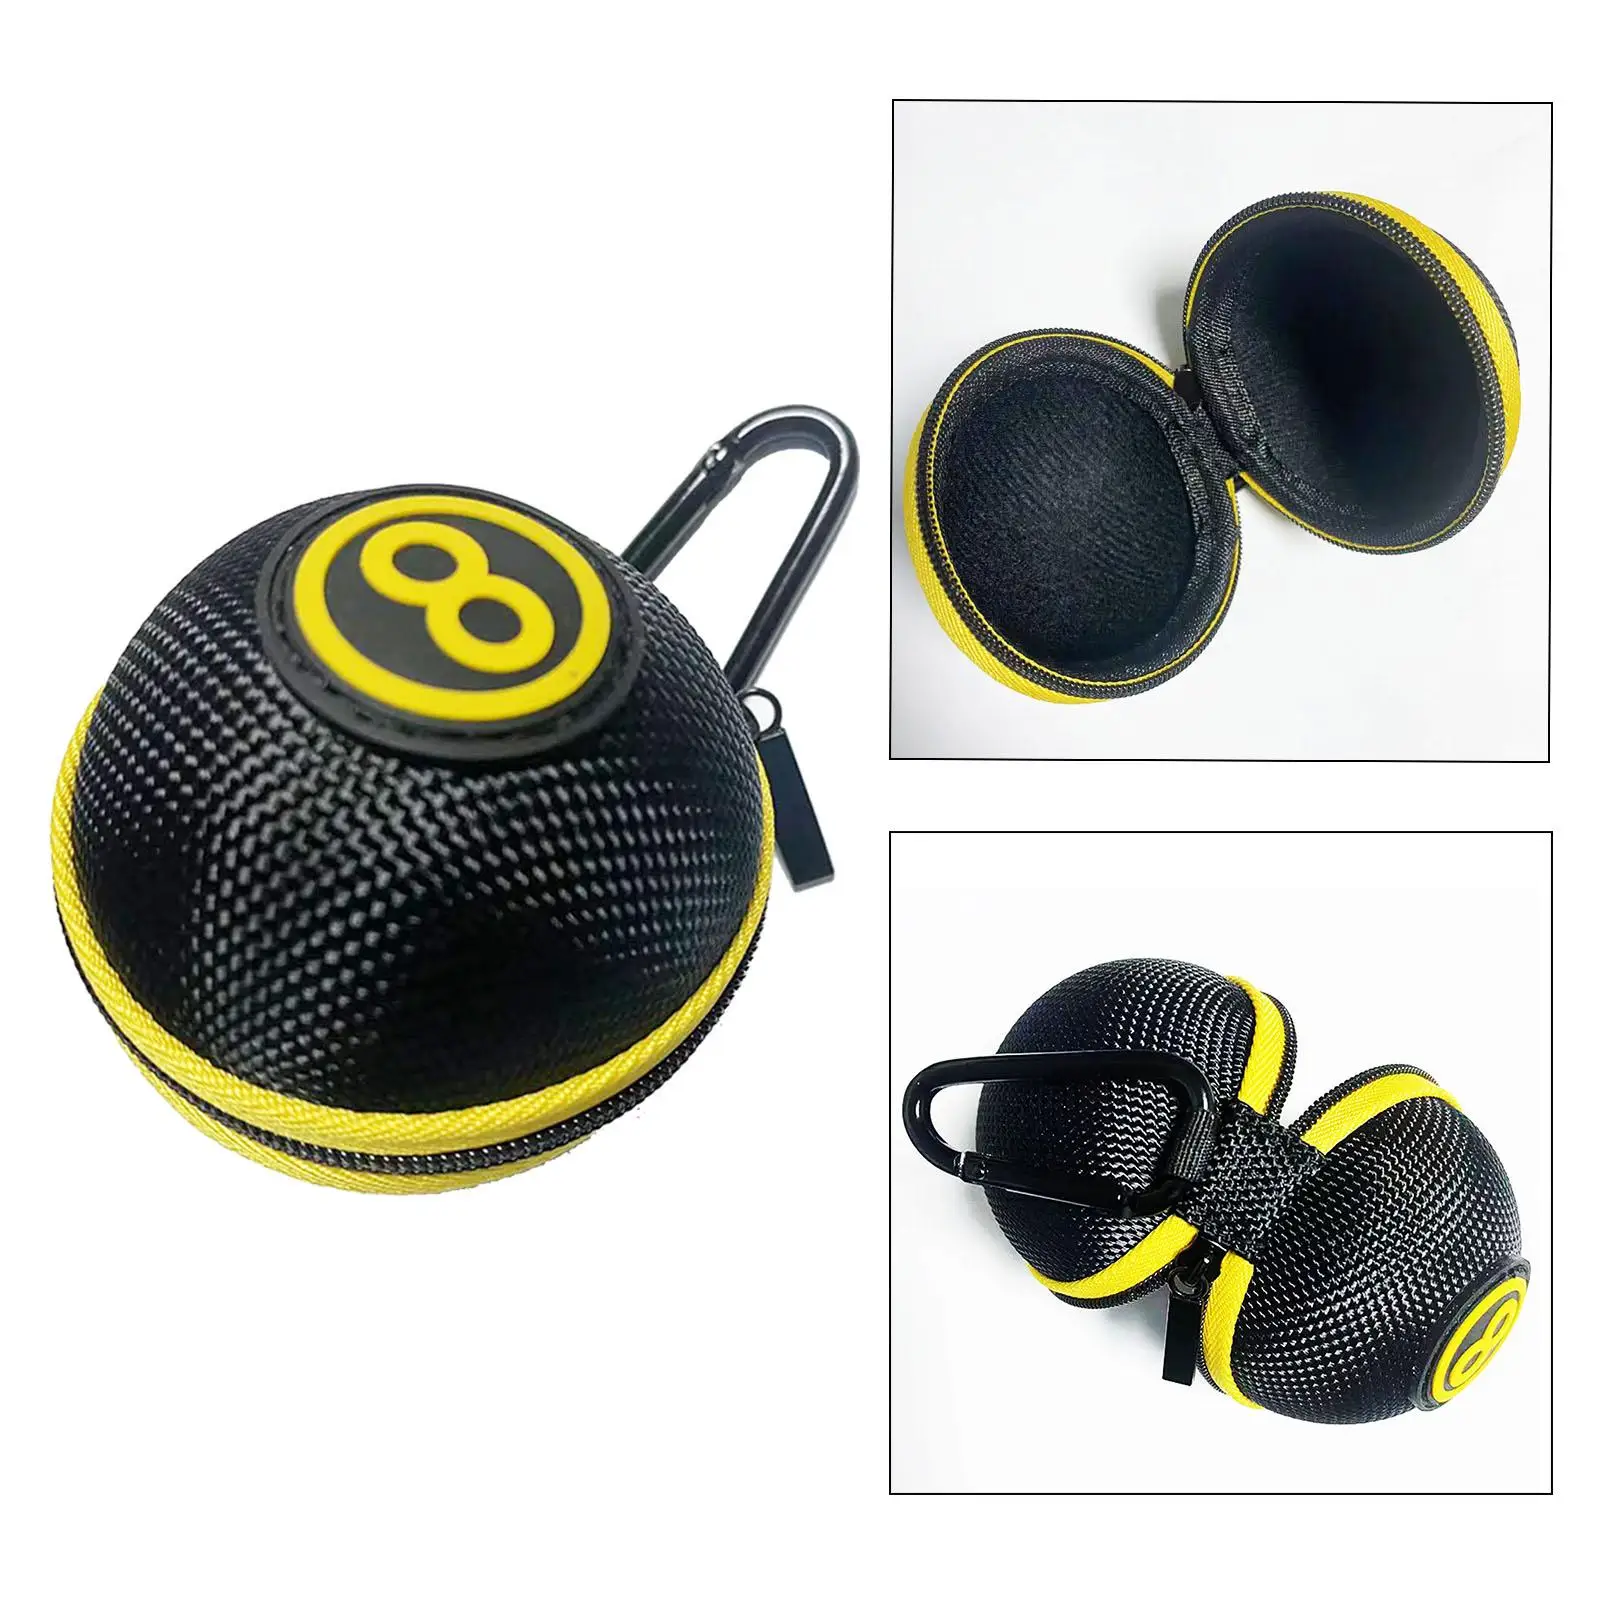 Premium Cue Ball Case Protector Holder Cue Chalk Bag Travel to Cue Stick Bag Carrying Bag for Attaching Cue Ball Billiard Ball